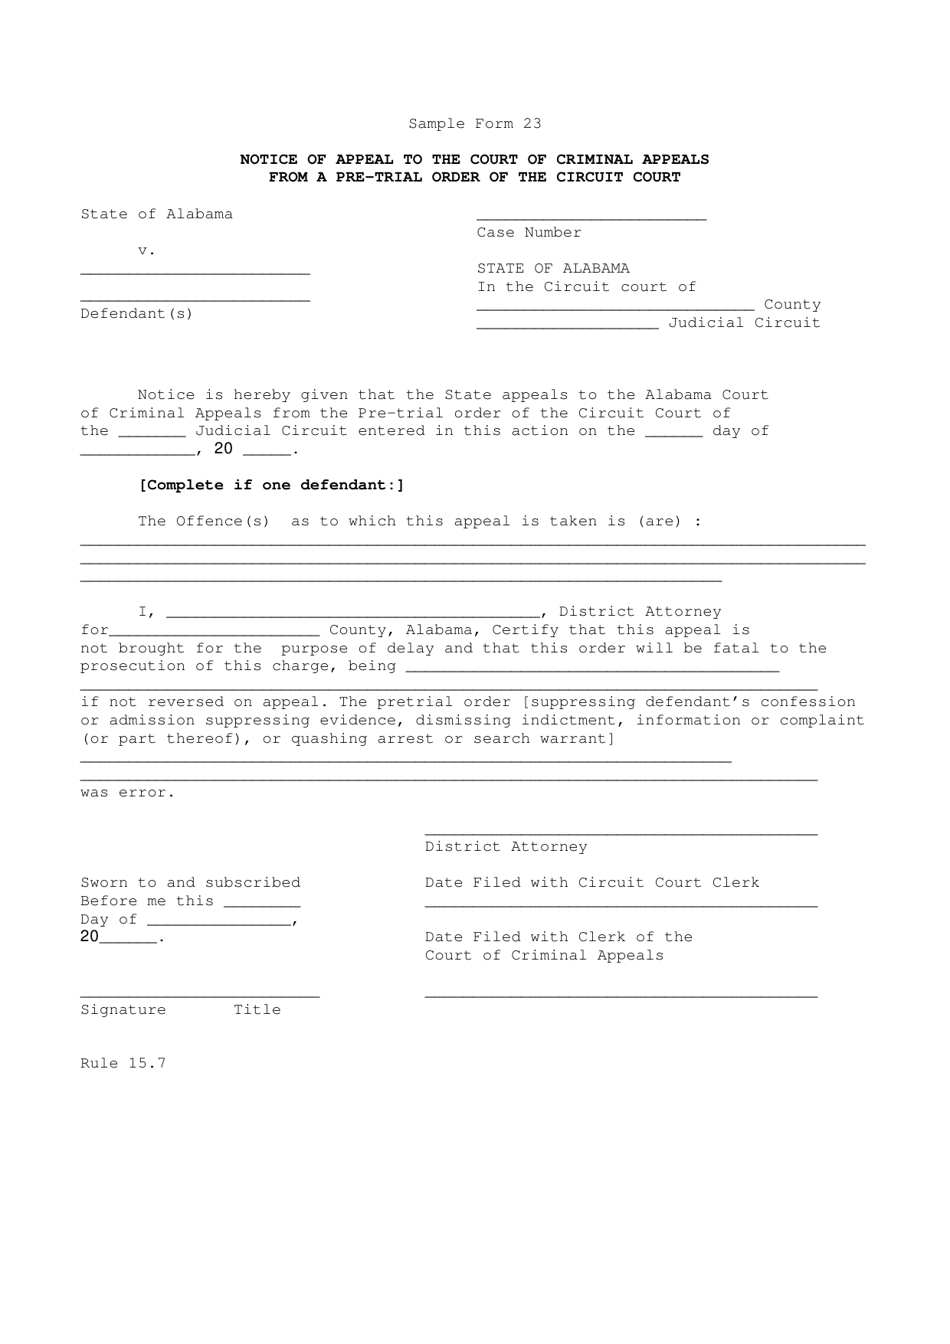 Sample Form 23 Notice of Appeal to the Court of Criminal Appeals From a Pre-trial Order of the Circuit Court - Alabama, Page 1